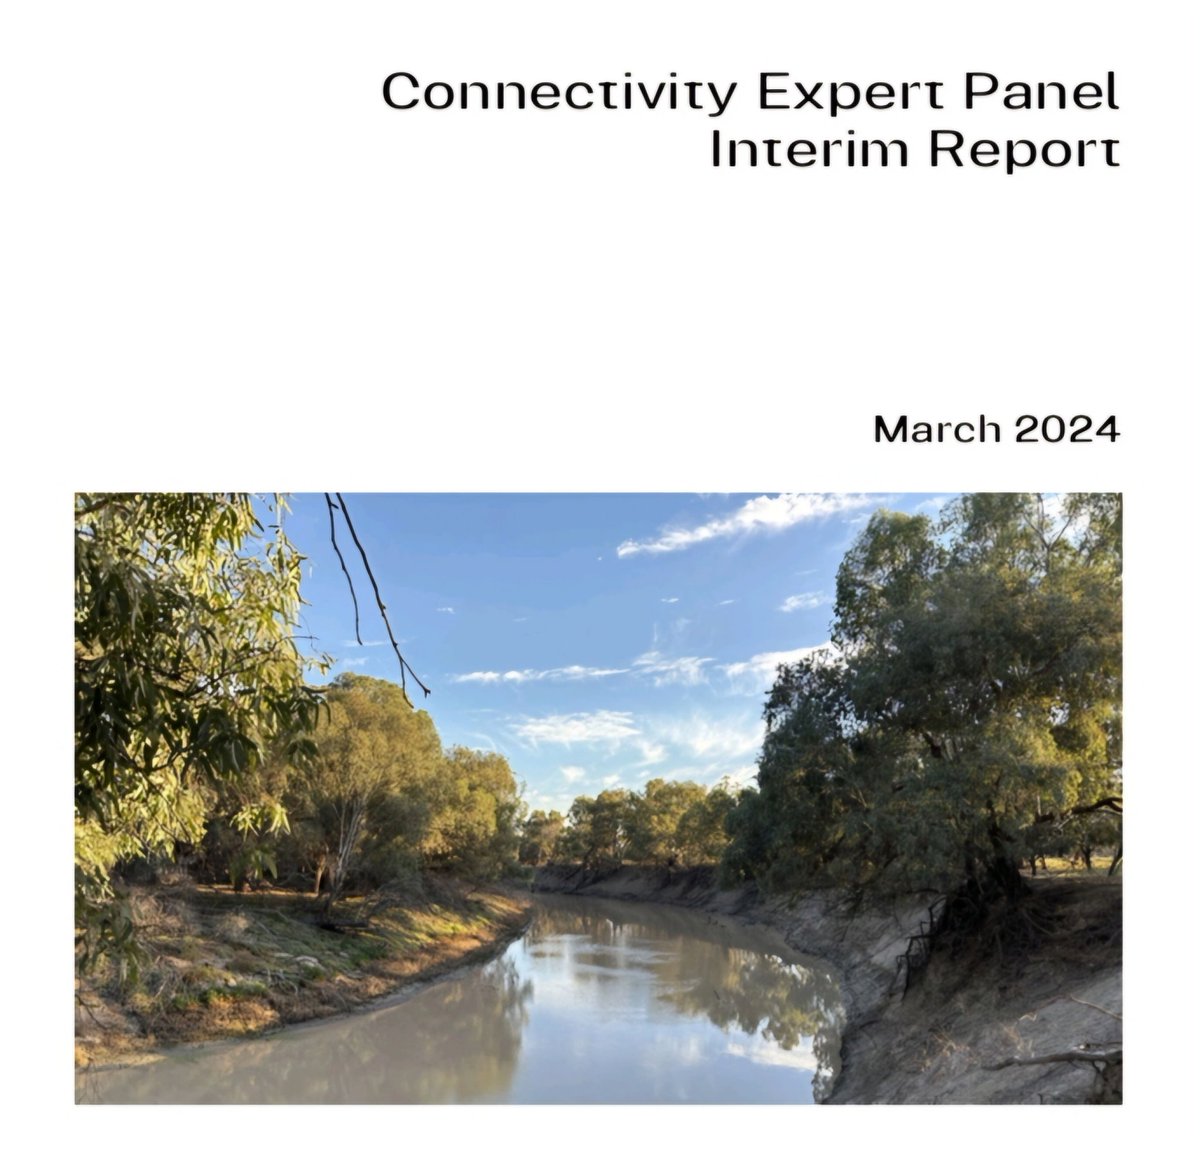 Radical NSW interim connectivity report recommends rewriting water management by denying hydrology, undermining all water users' rights & autonomy, which would require the rewriting of interstate water sharing agreements. Your thoughts @RoseBJackson? water.dpie.nsw.gov.au/__data/assets/…